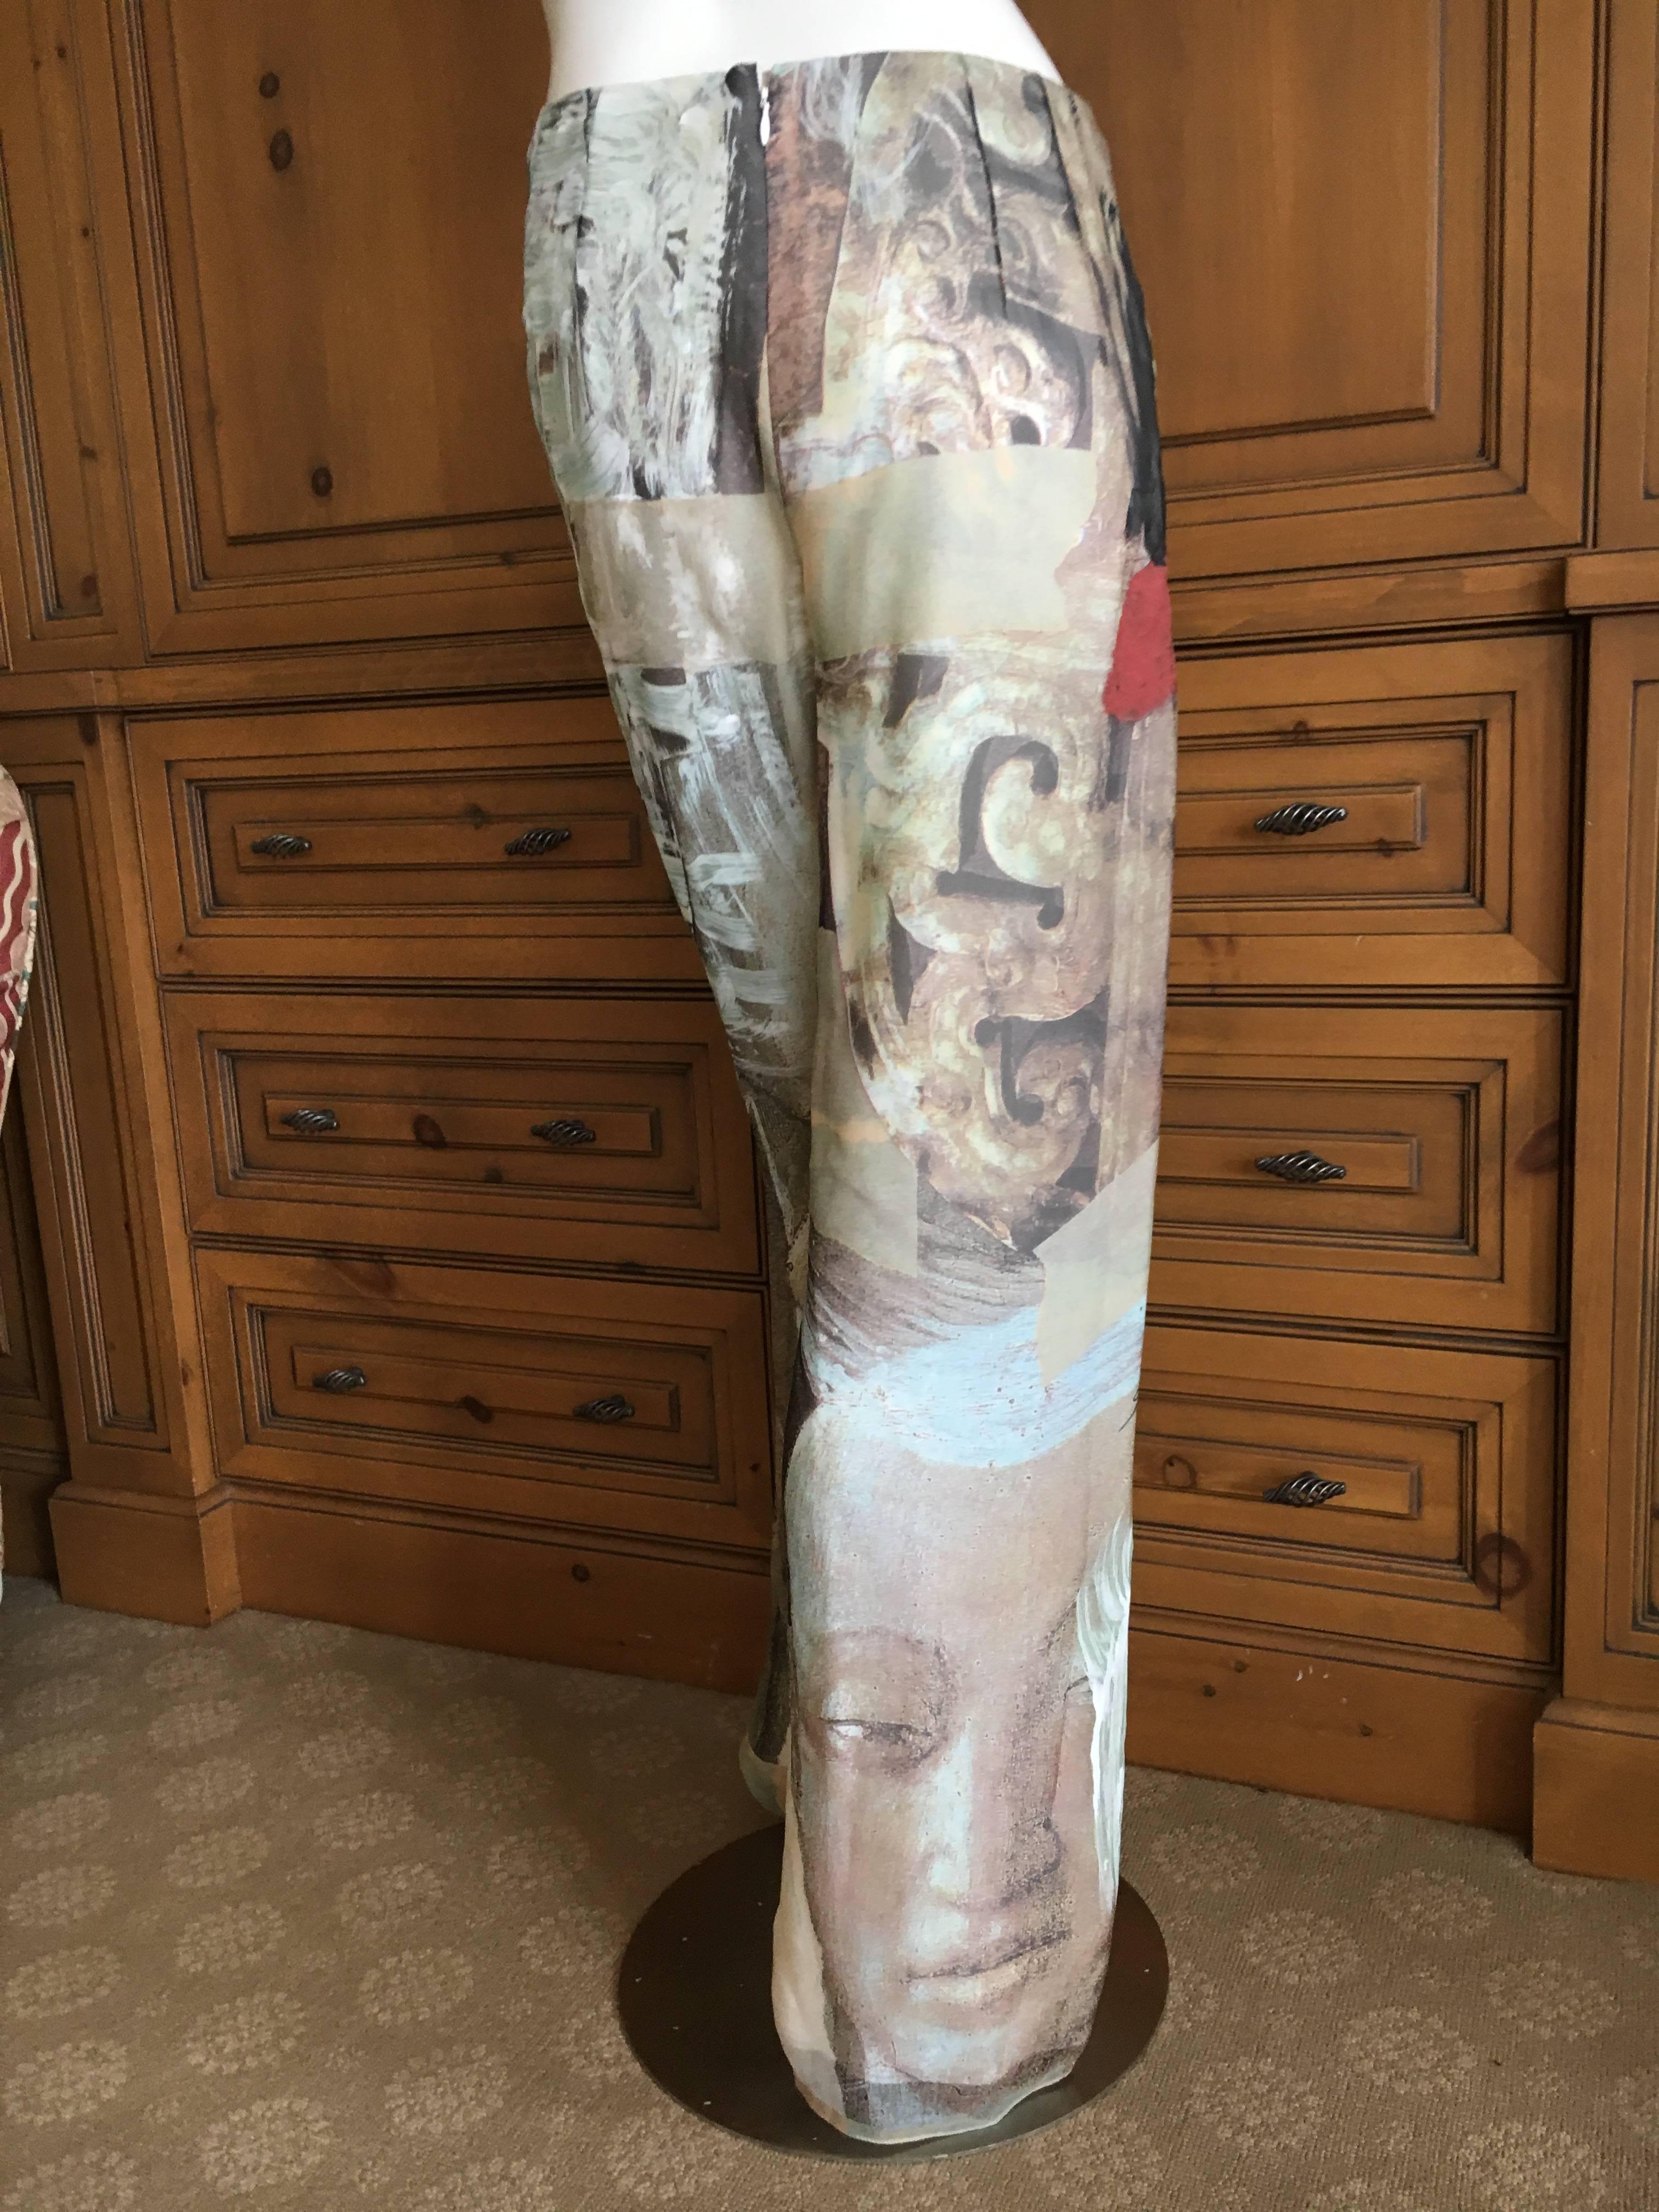 Chado Ralph Rucci Exquisite Silk Evening Pants In Excellent Condition For Sale In Cloverdale, CA